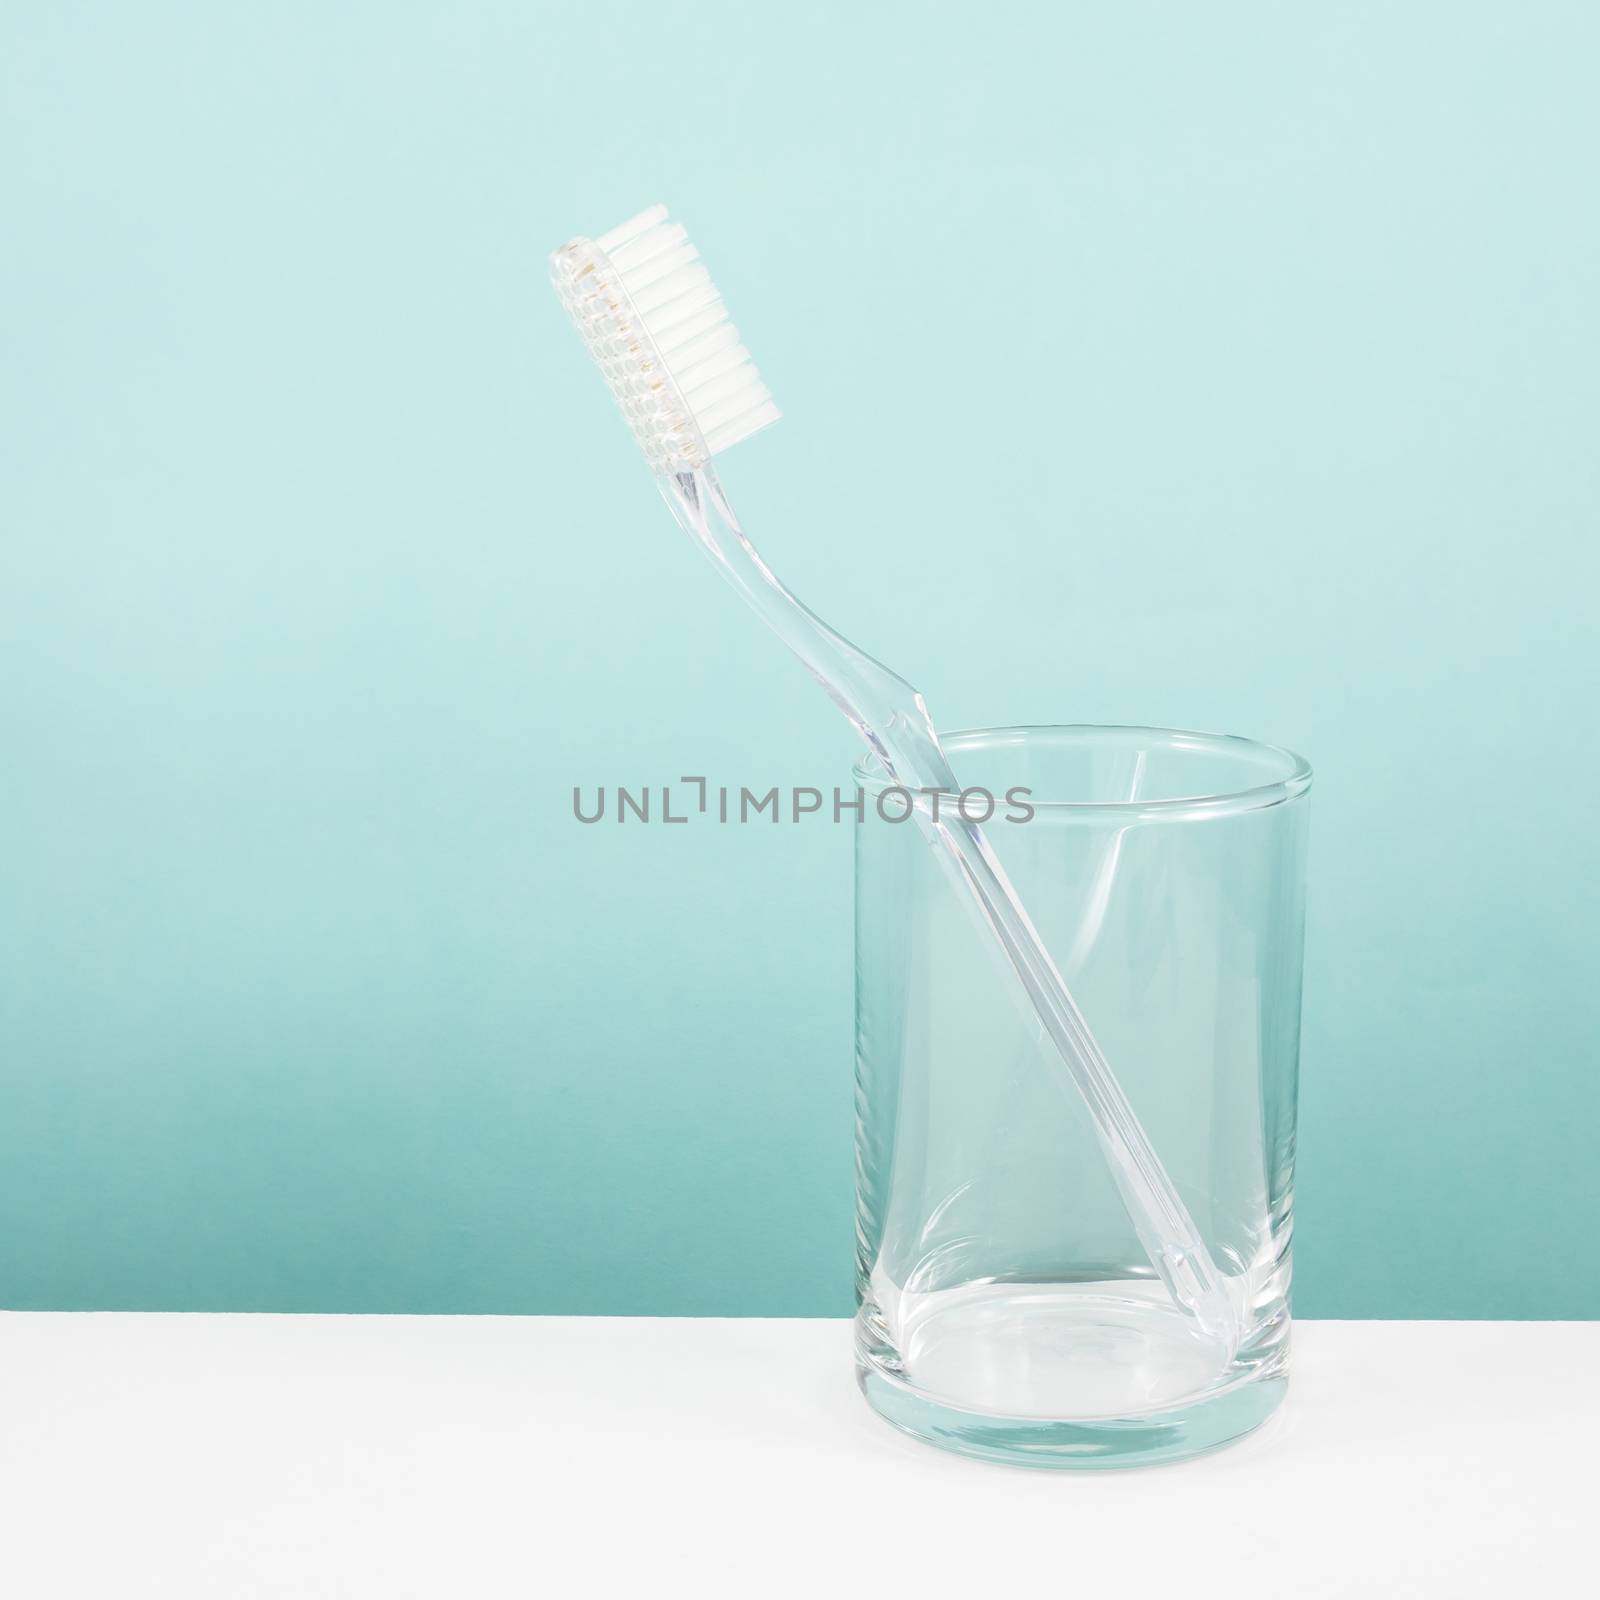 The clear toothbrush with small glass for brushing the teeth.